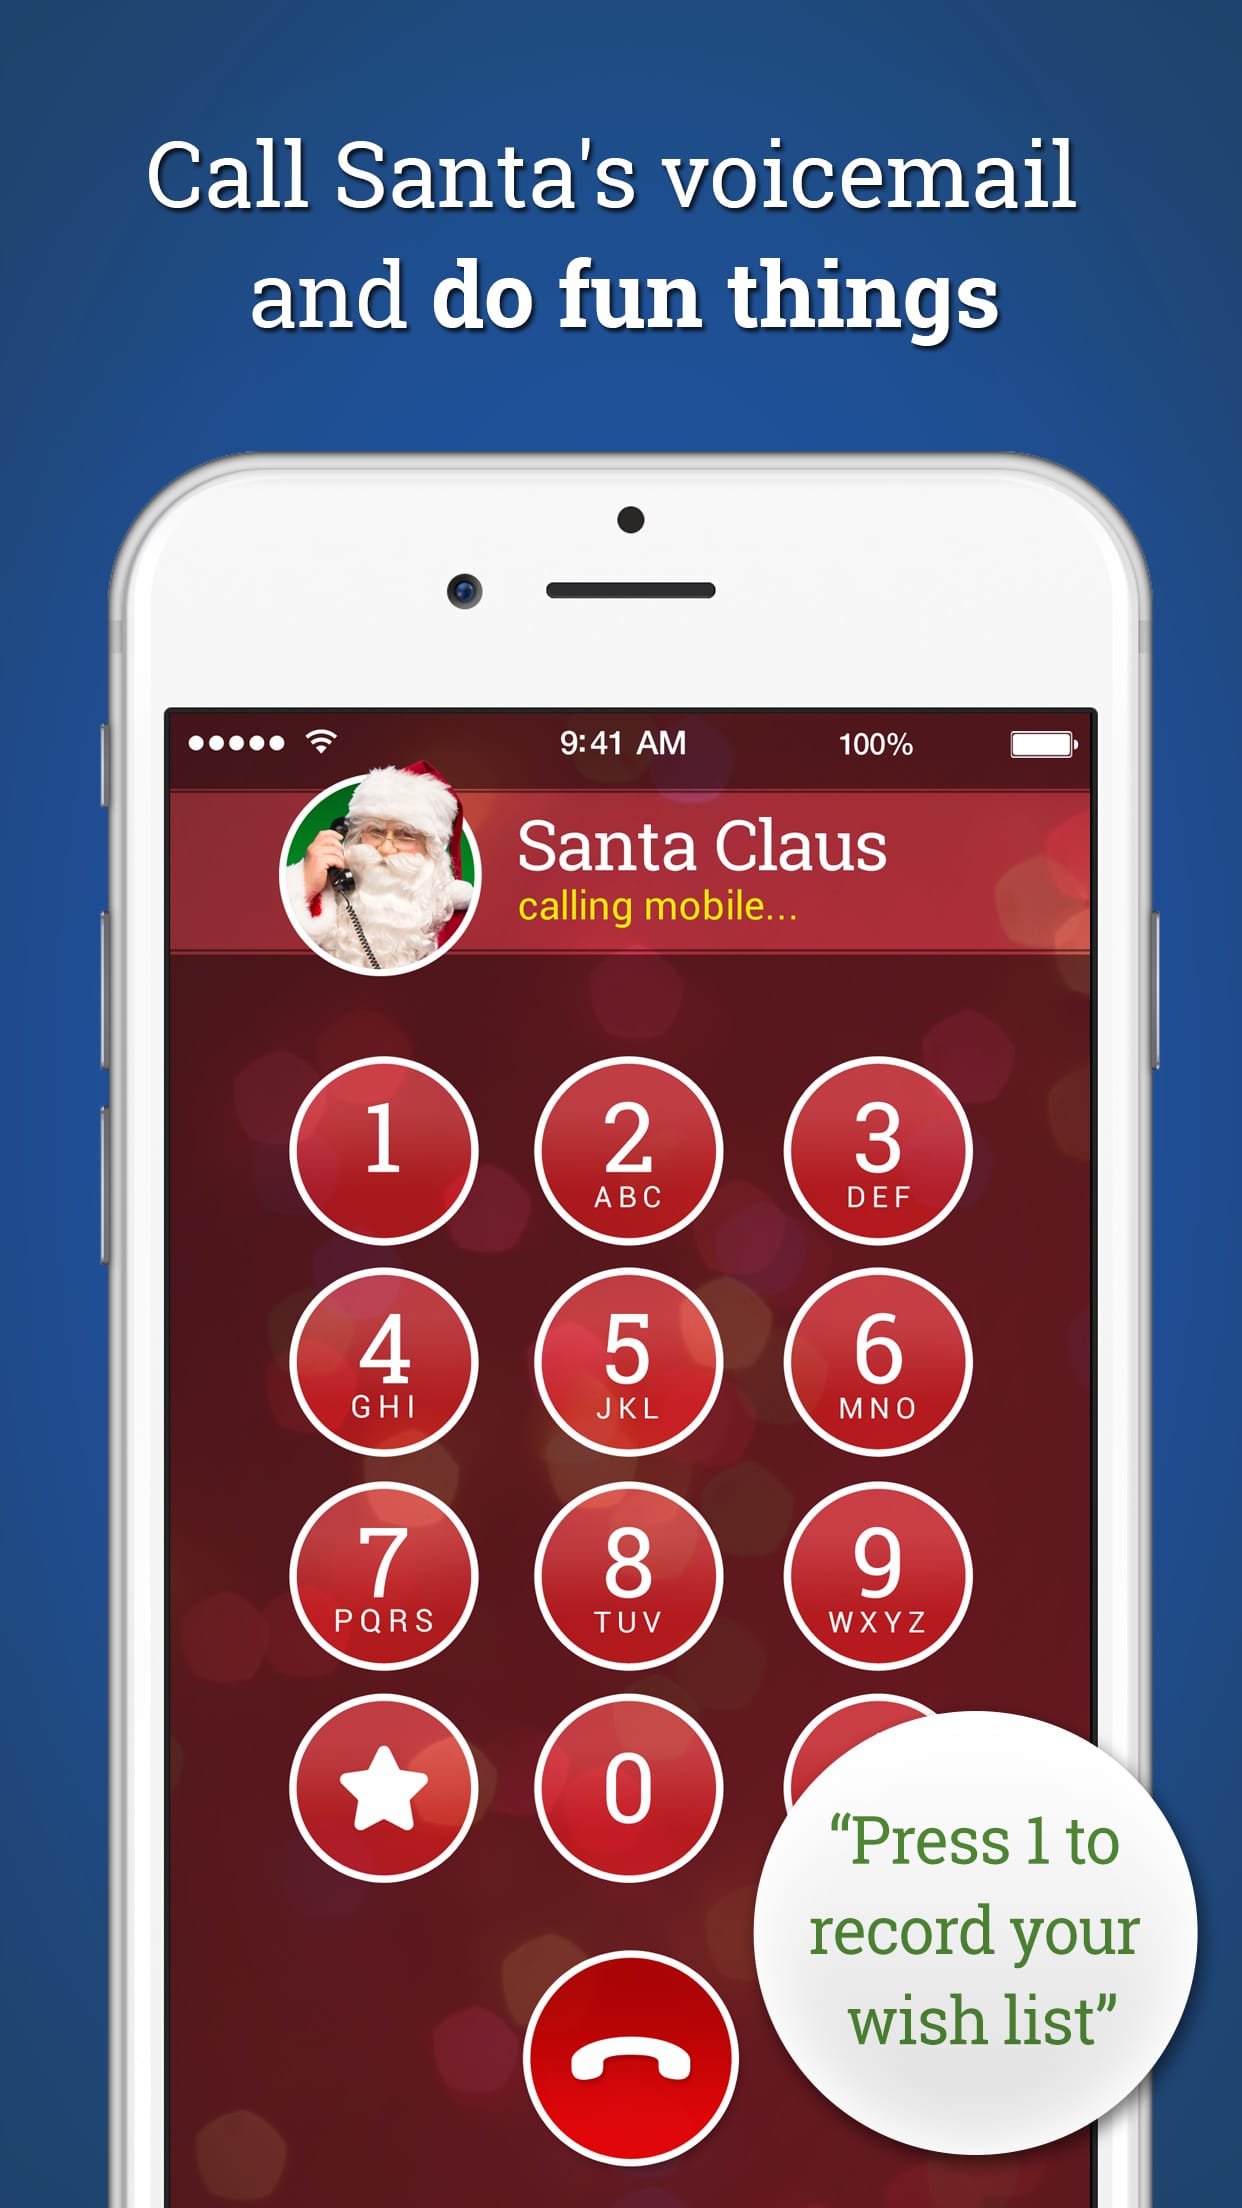 Message From Santa The Best Way To Call Santa Claus